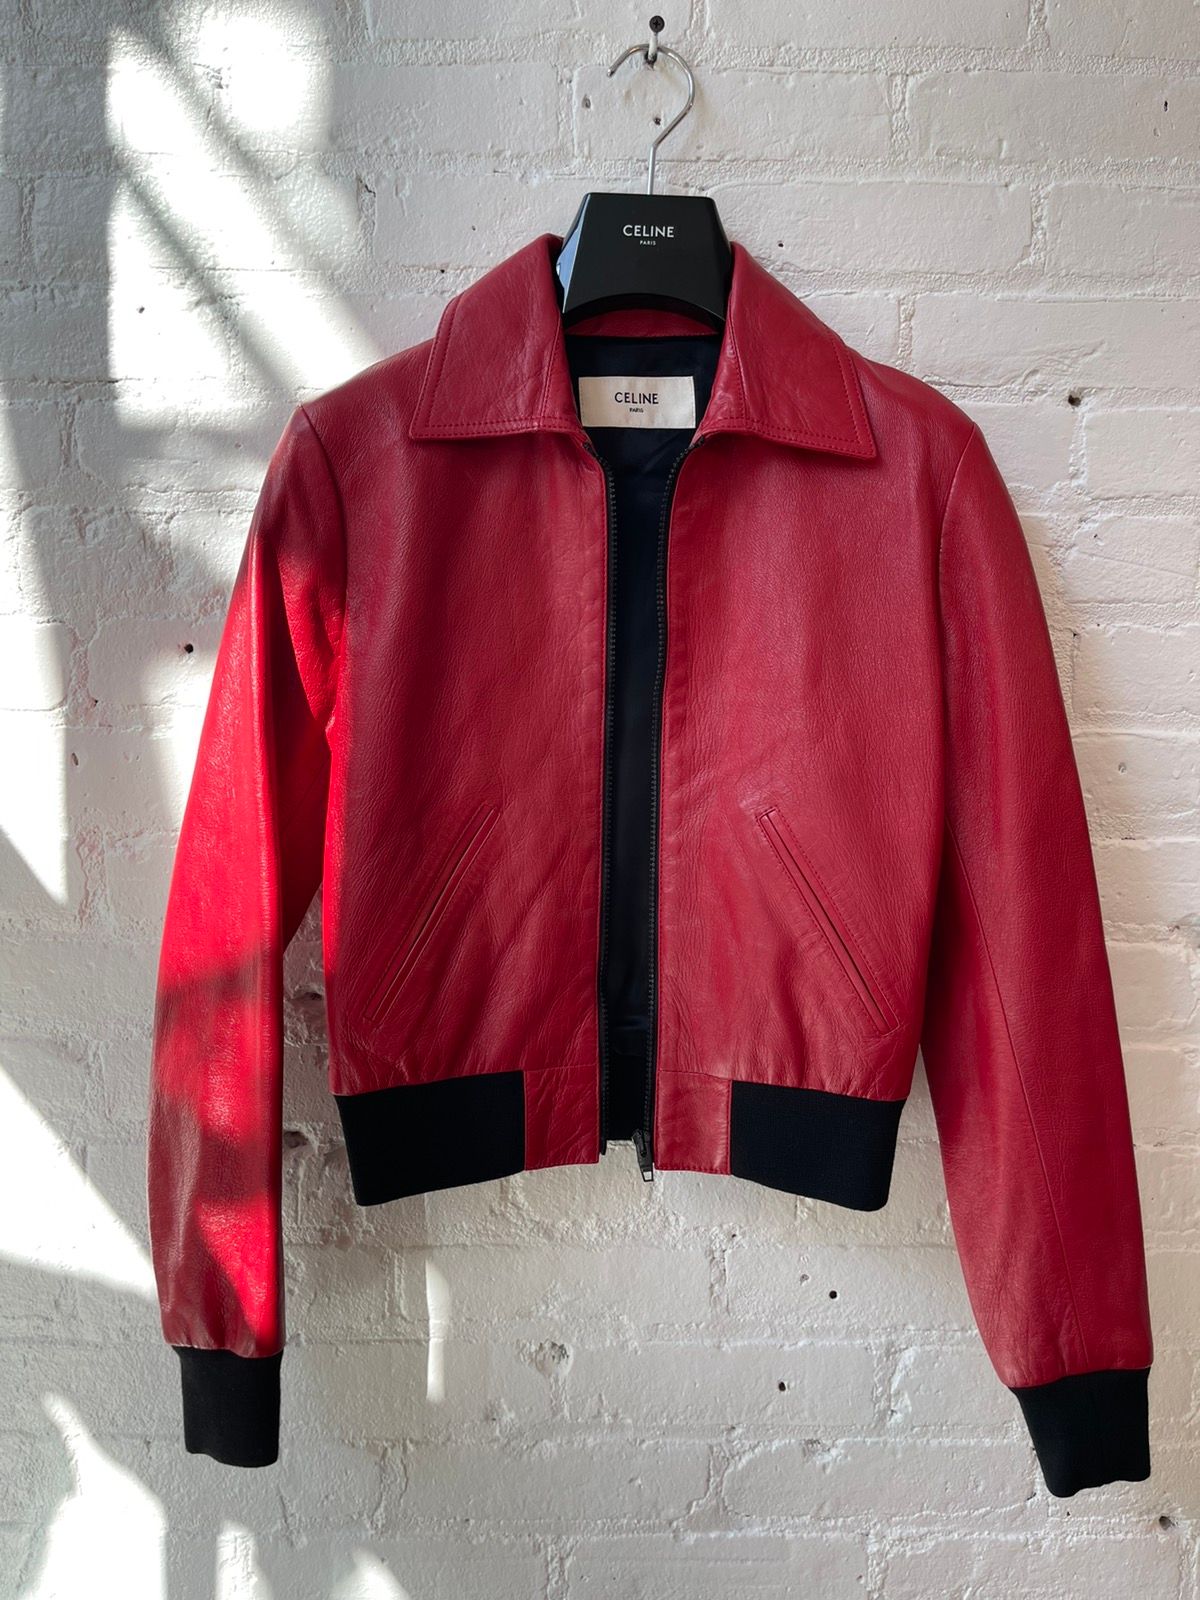 Celine FW20 Hedi NEW 1/1 Red Leather Center Zip Jacket